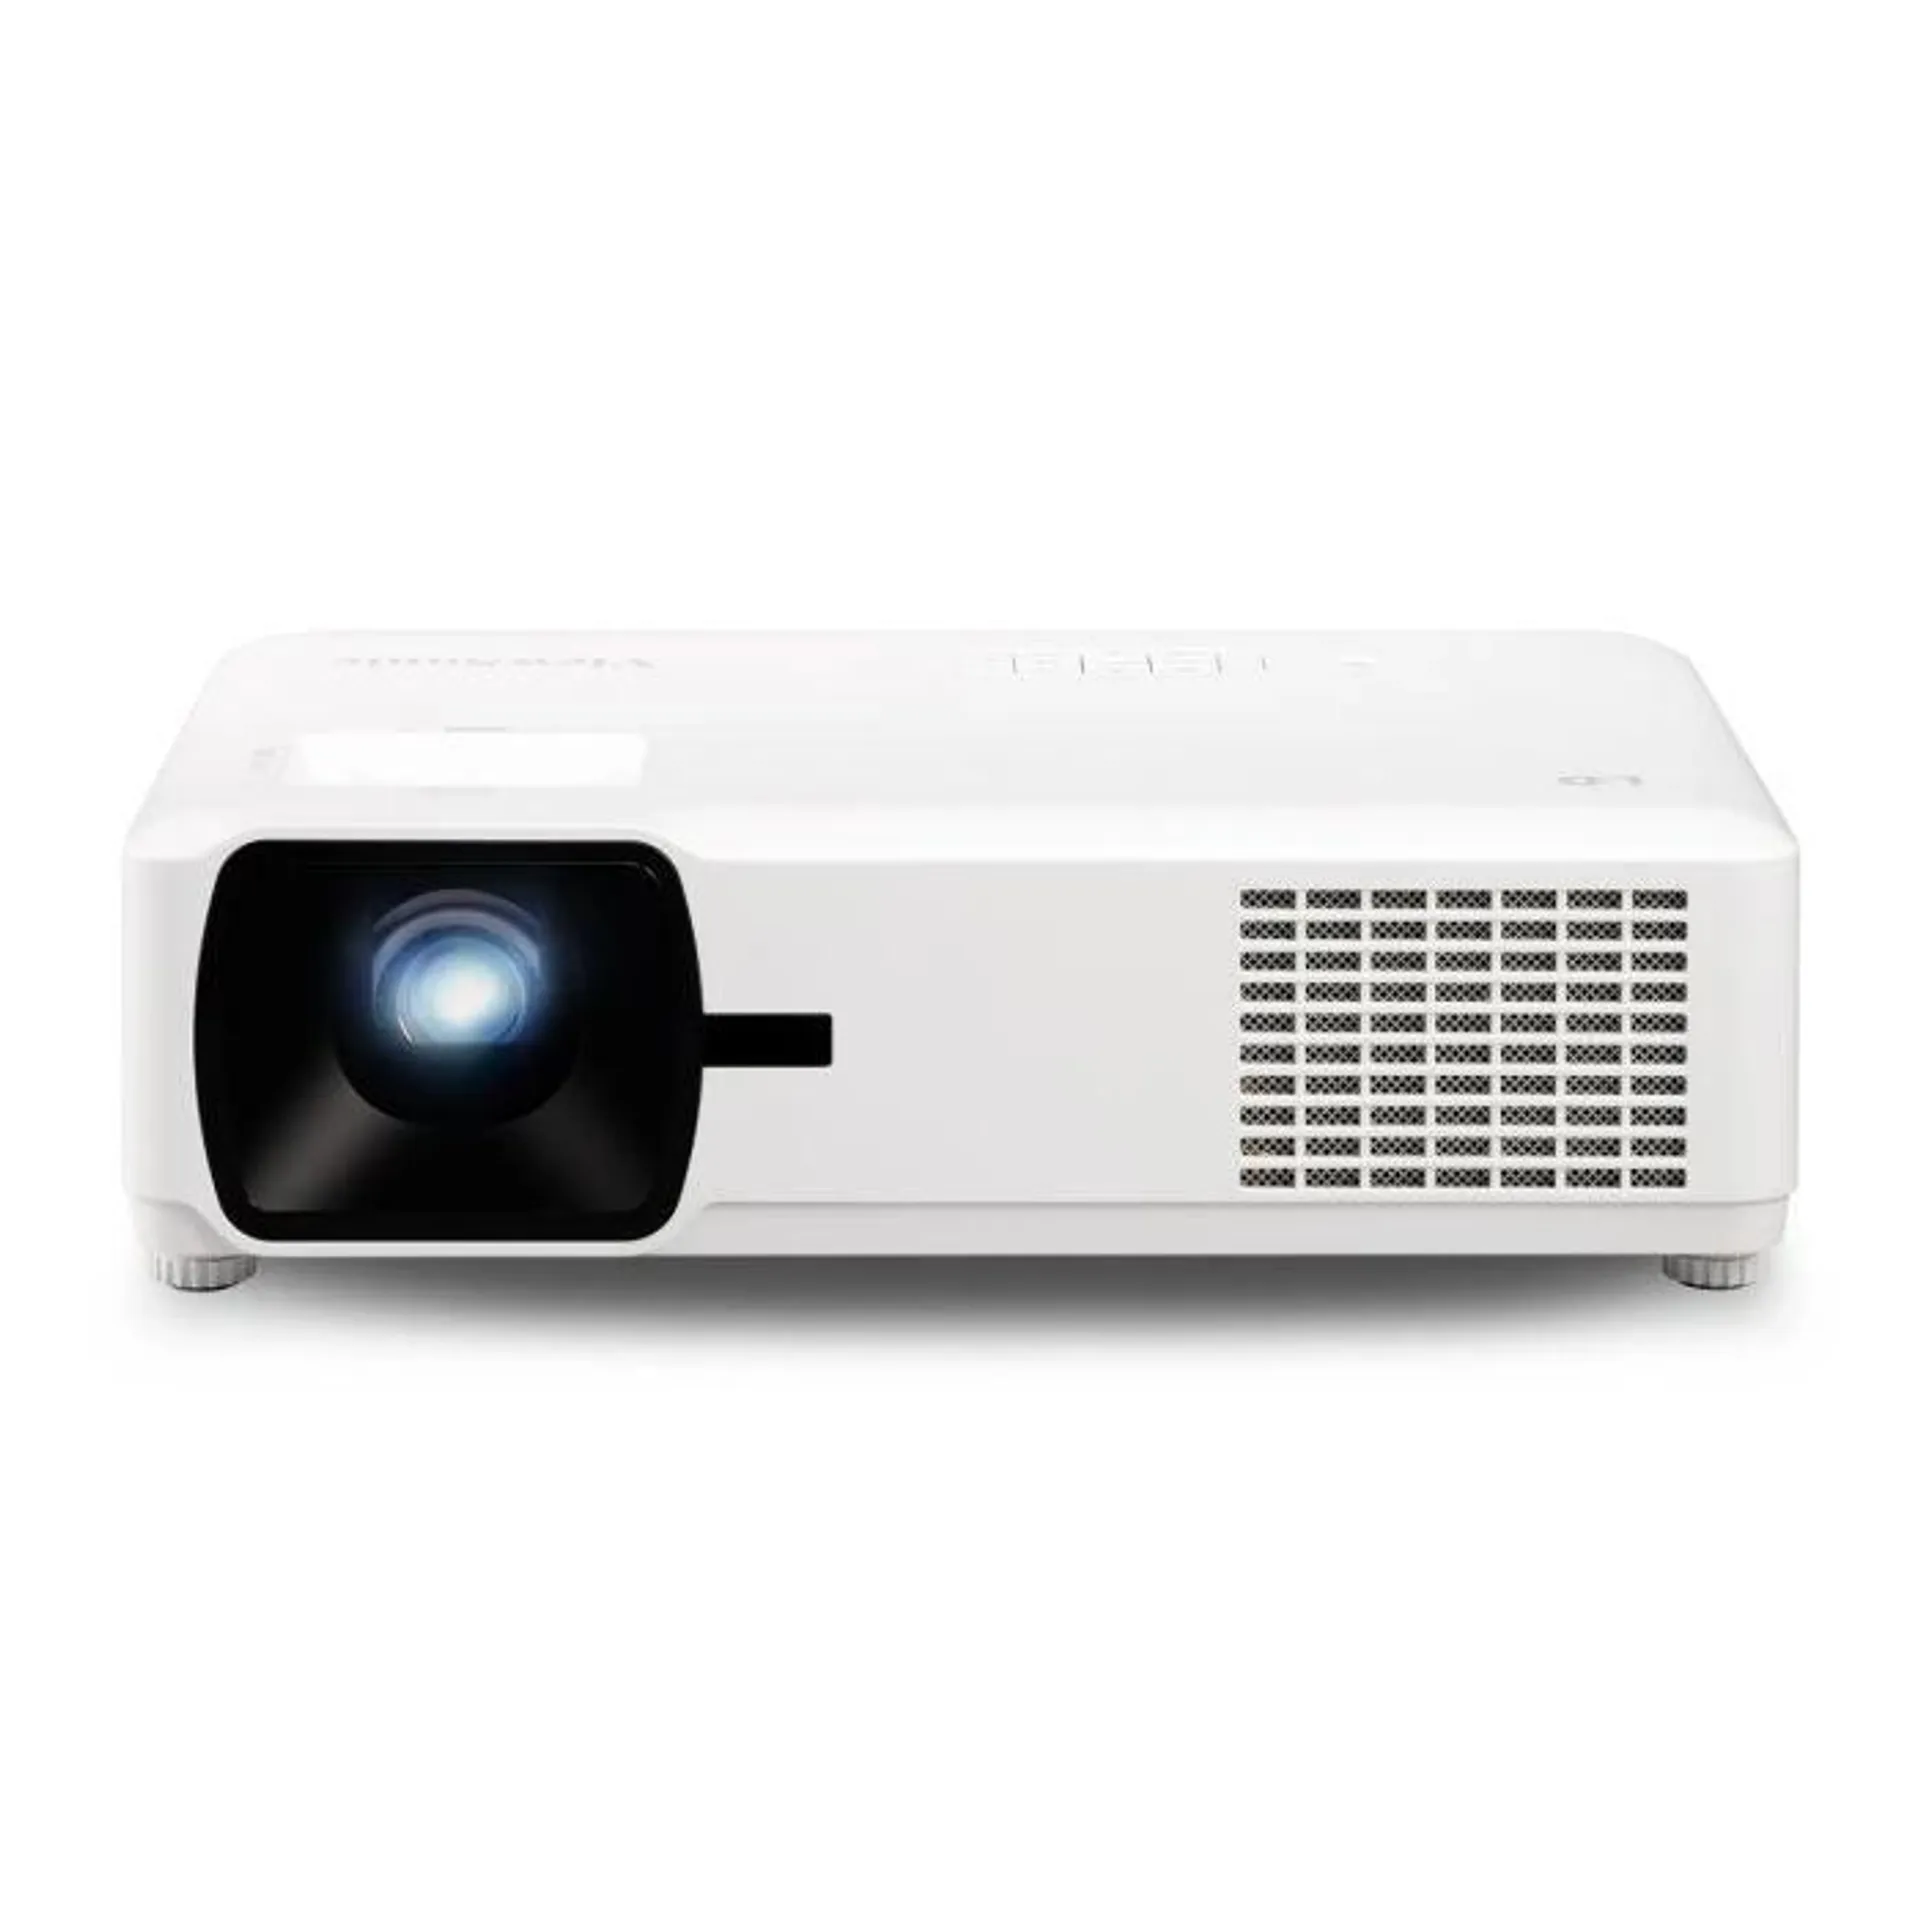 LS610HDH - 4,000 ANSI Lumens 1080p LED Business/Education Projector